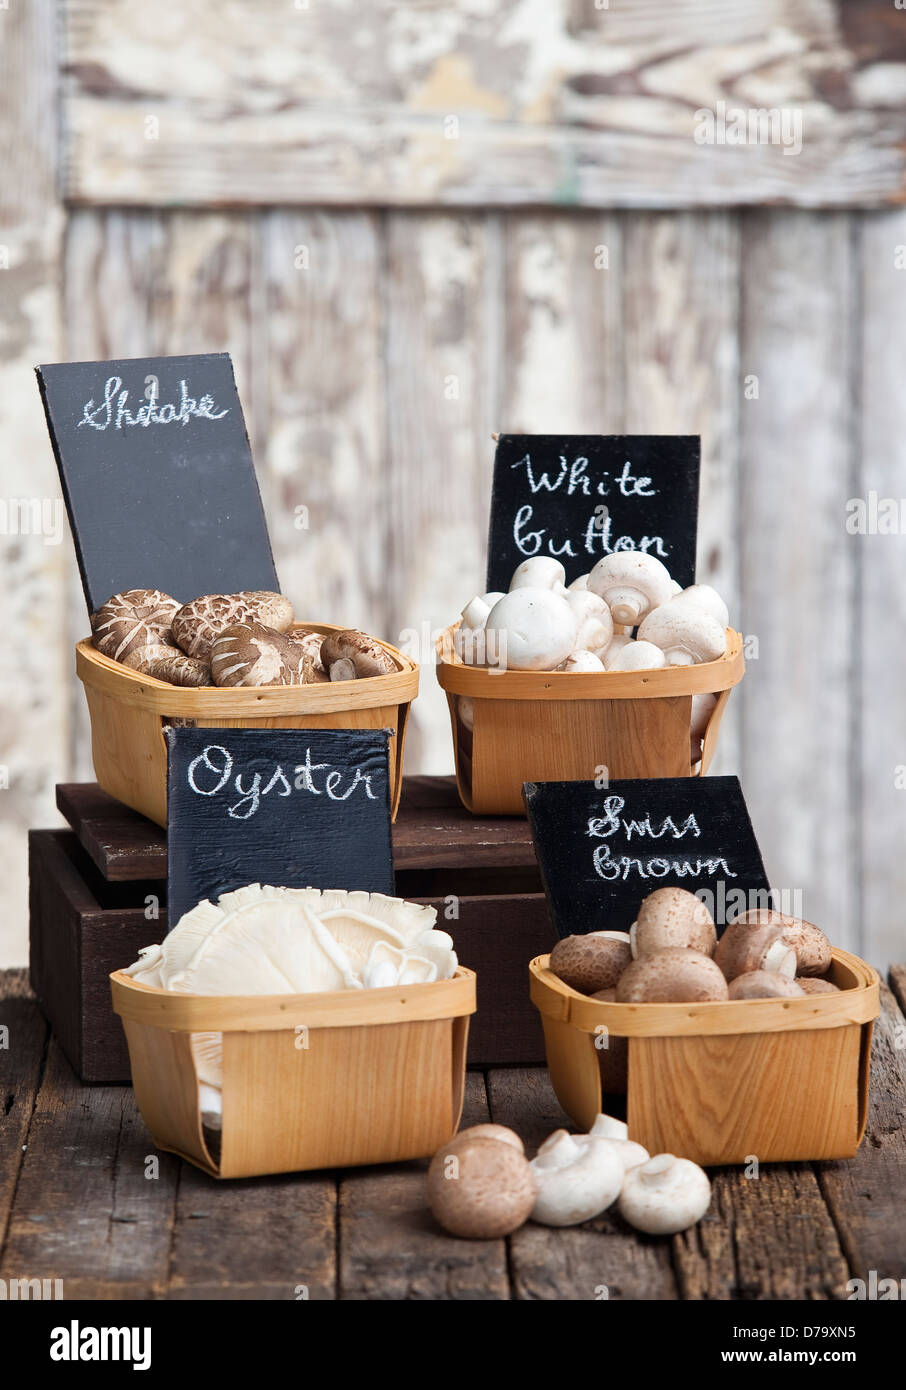 Punnets of Shitake, Swiss brown, Oyster and white button mushrooms on a rustic wooden tabletop. Stock Photo